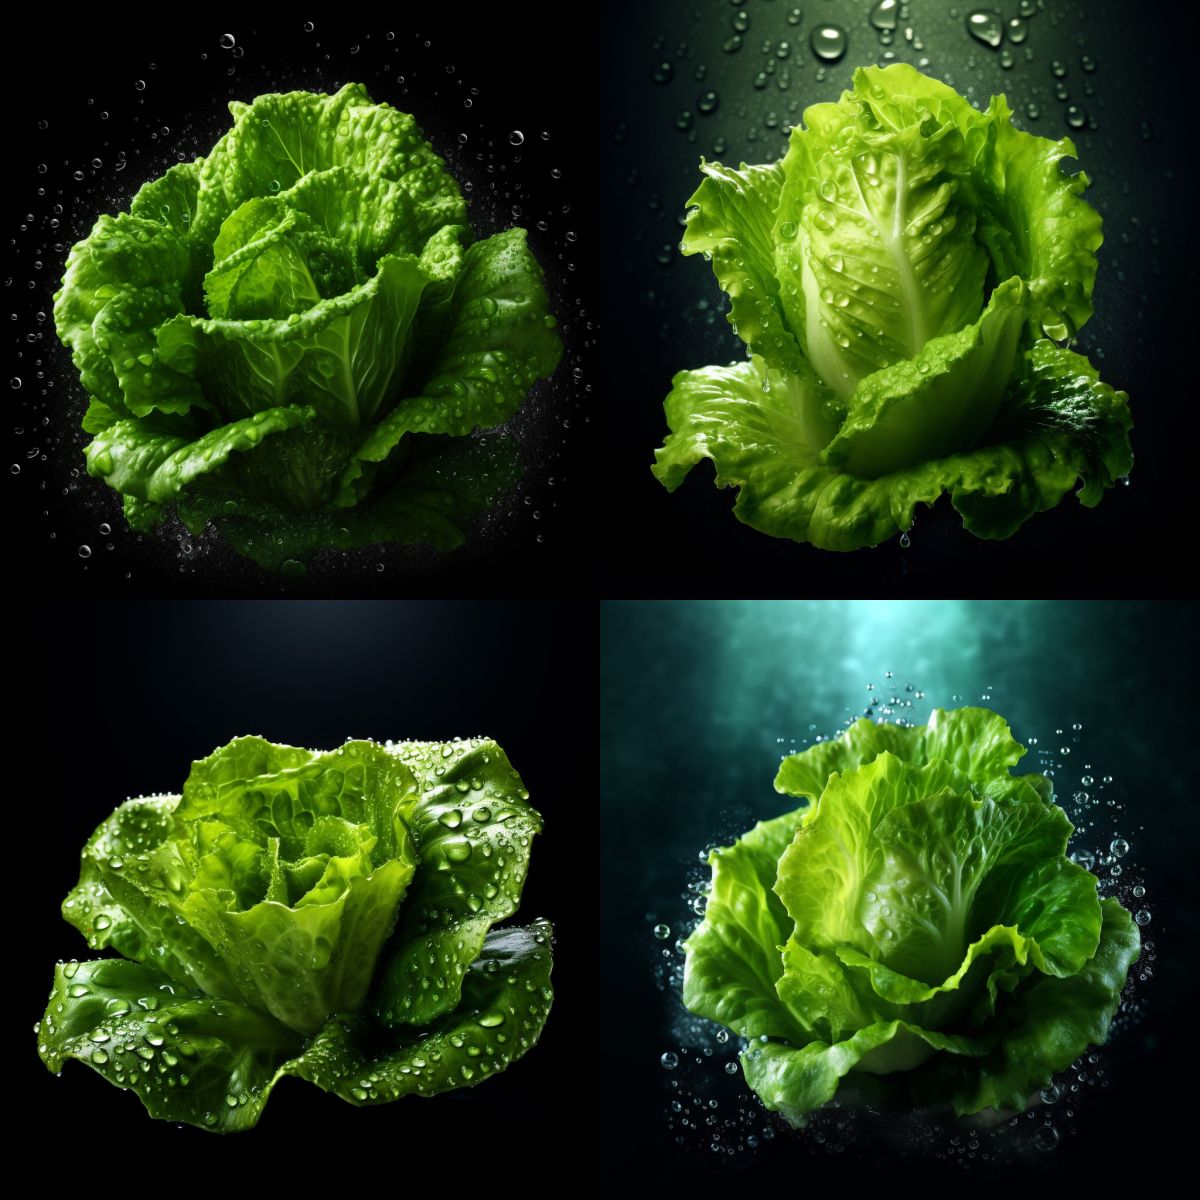 Senwater_lettuce_with_drops_of_water_hyper_realistic_photograph_2bd33dfd-7a2f-437d-9d31-3d4bec367fd5